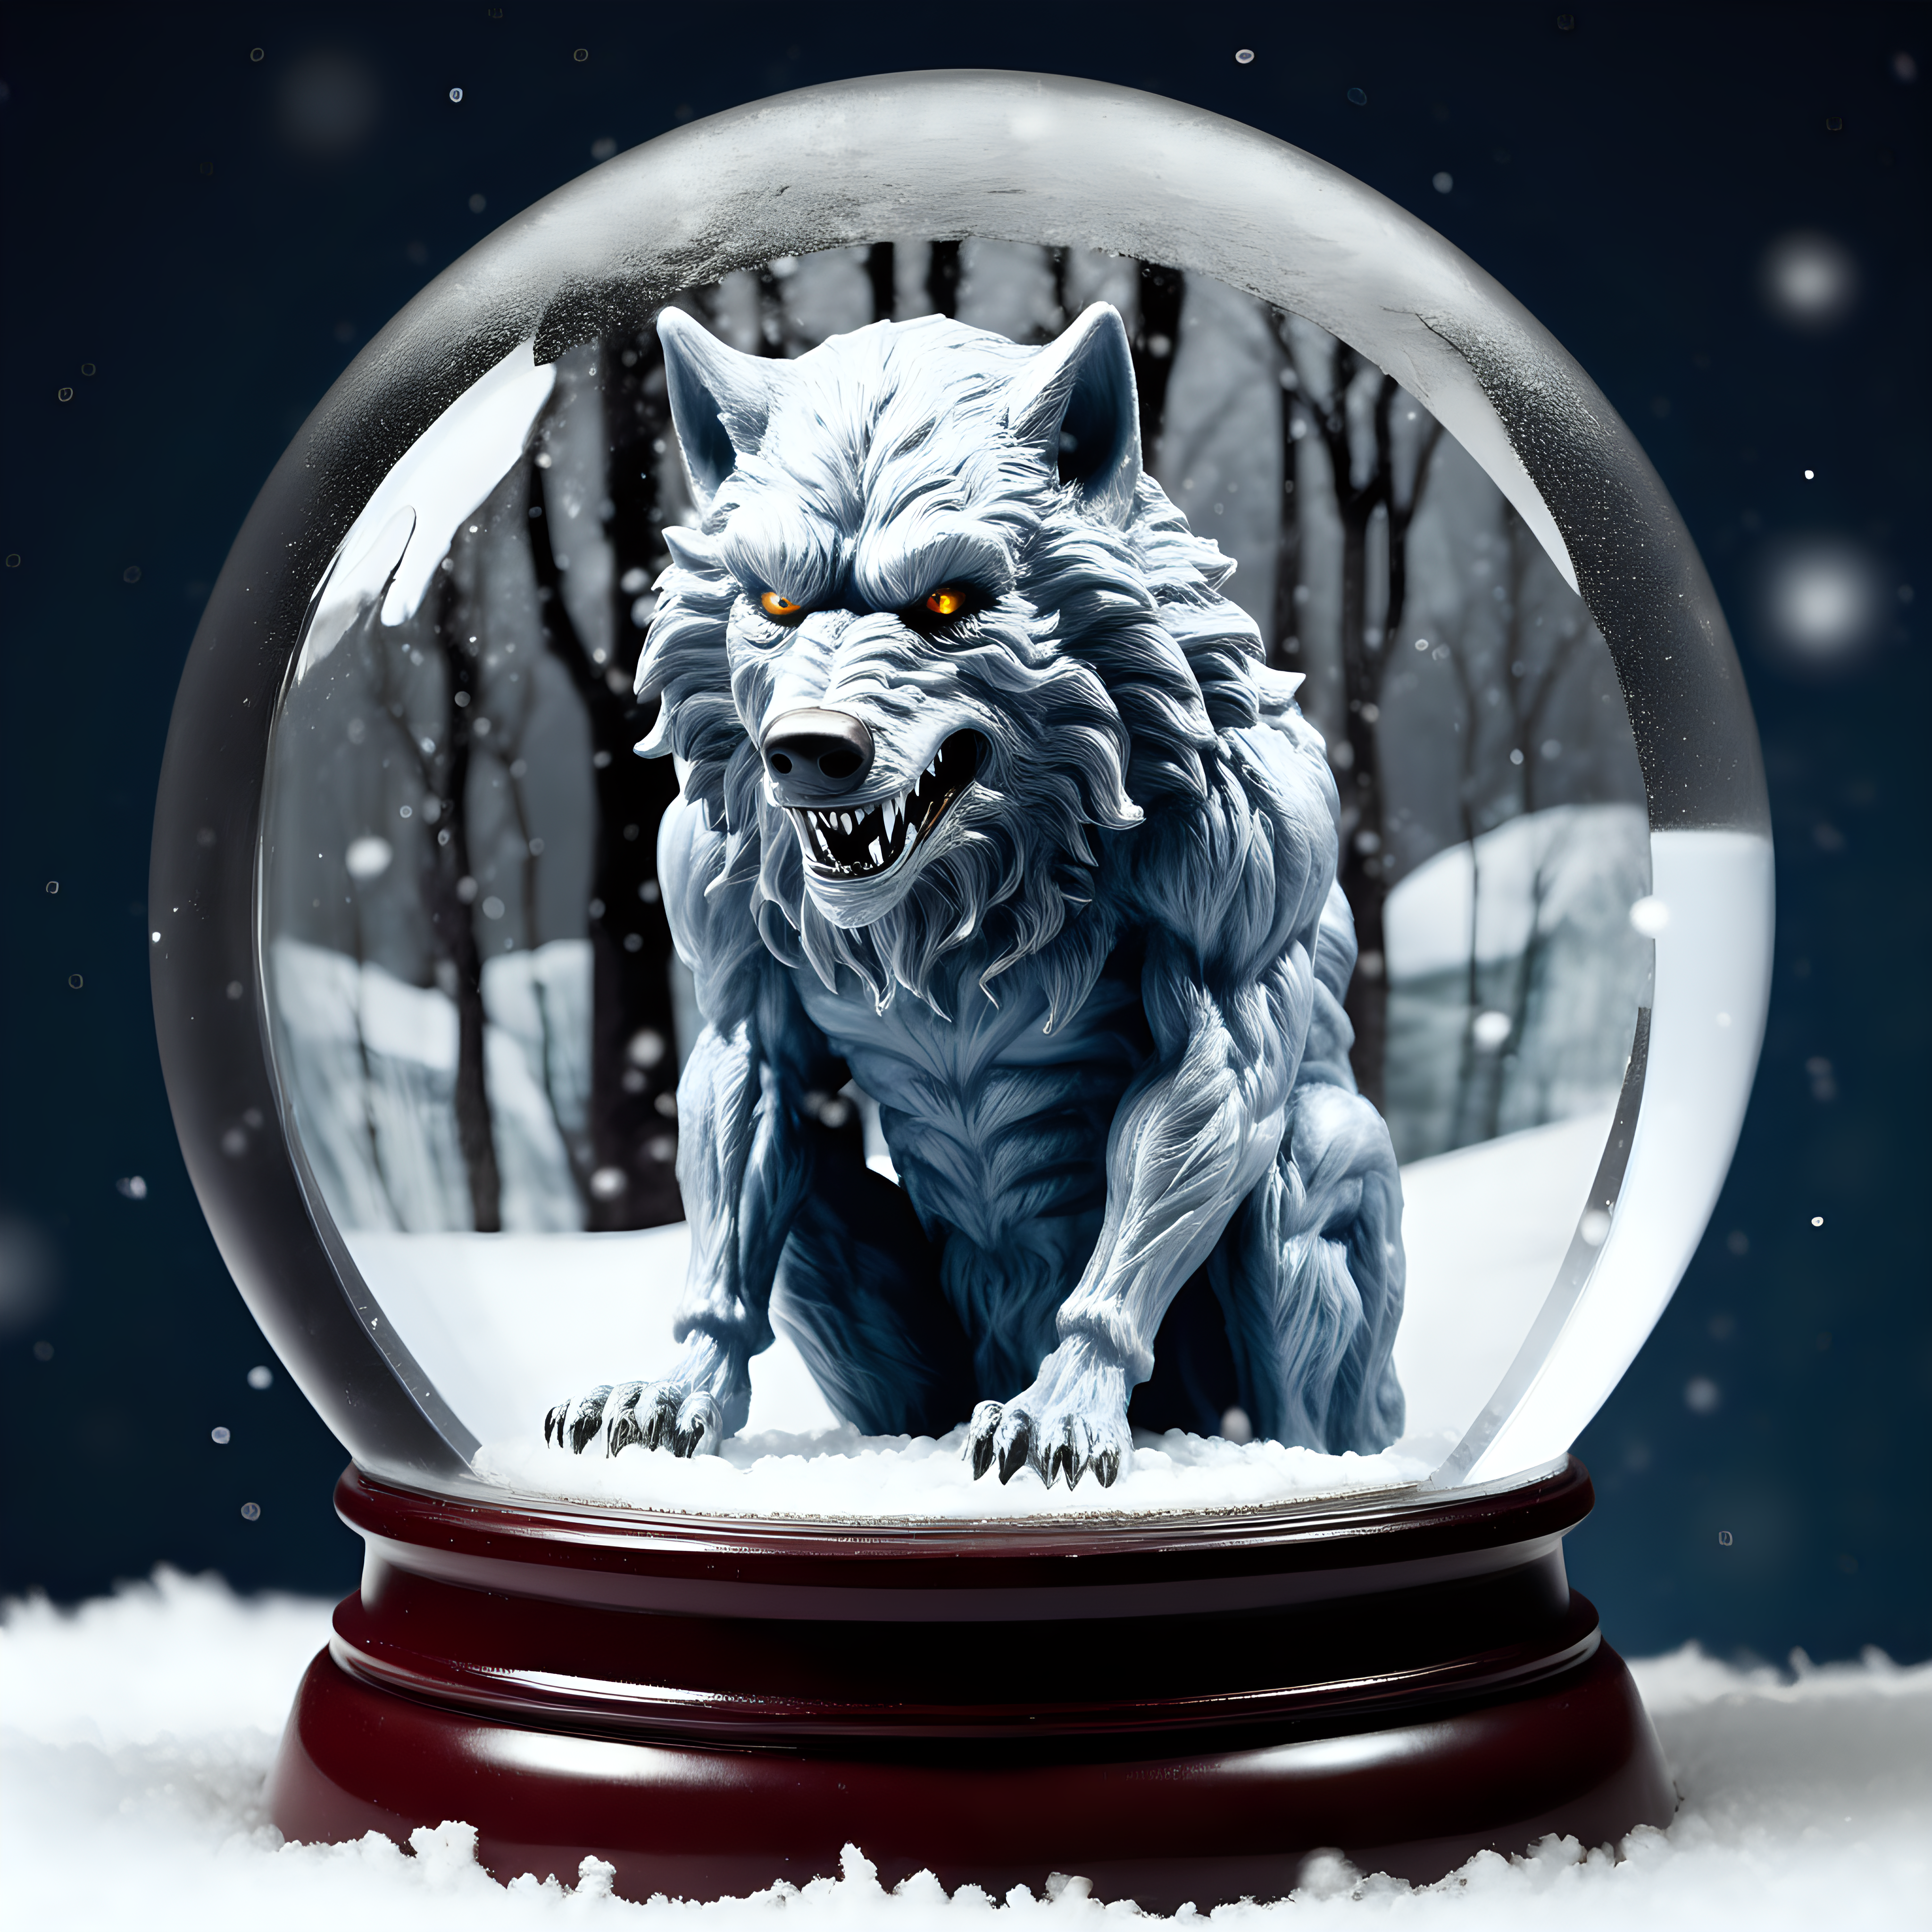 Wolfman in a snow globe